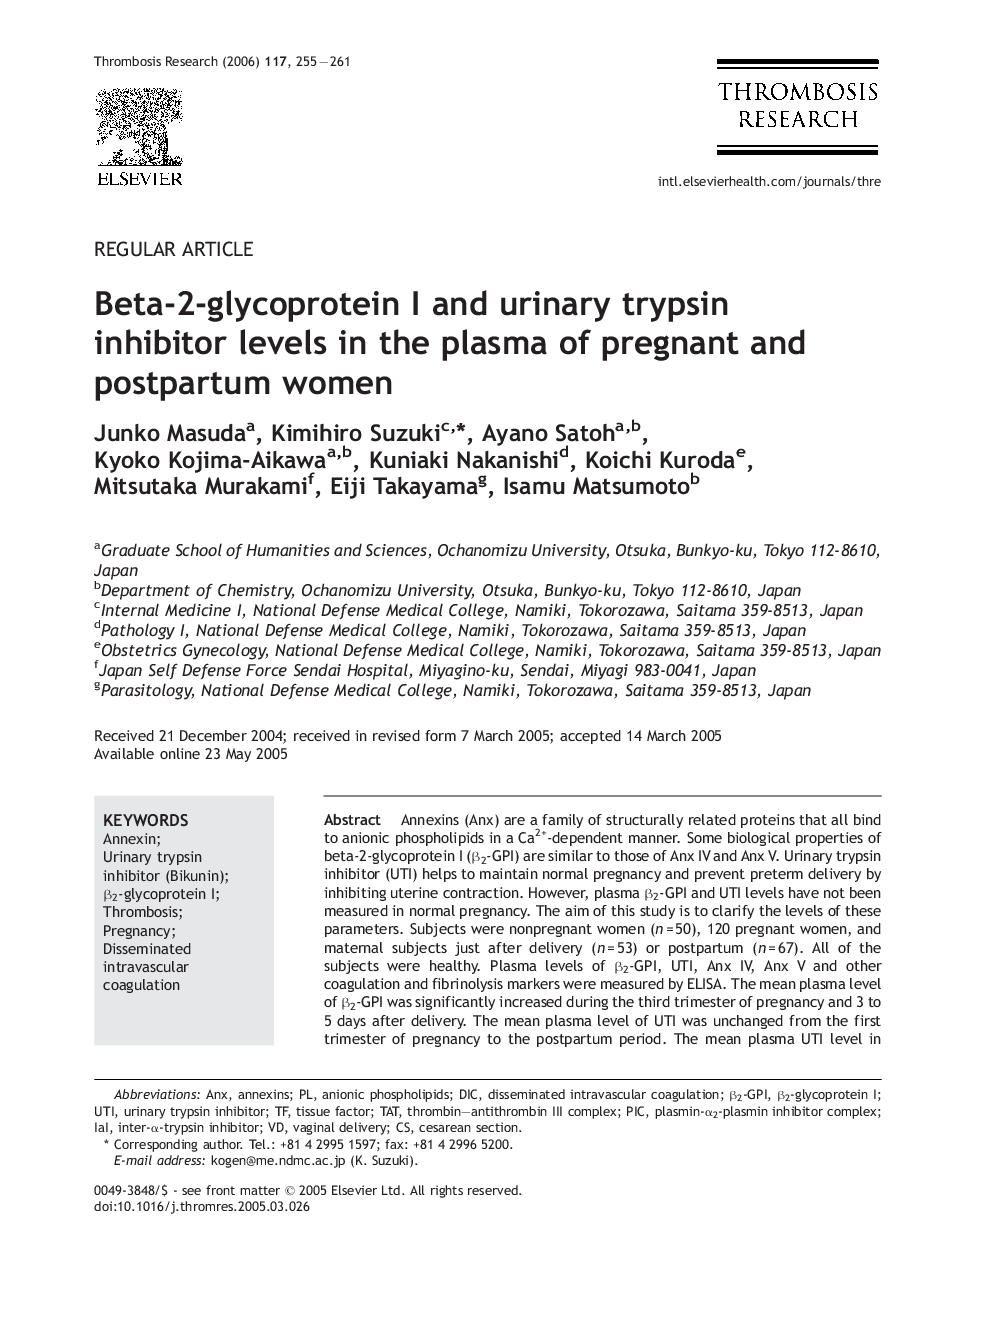 Beta-2-glycoprotein I and urinary trypsin inhibitor levels in the plasma of pregnant and postpartum women